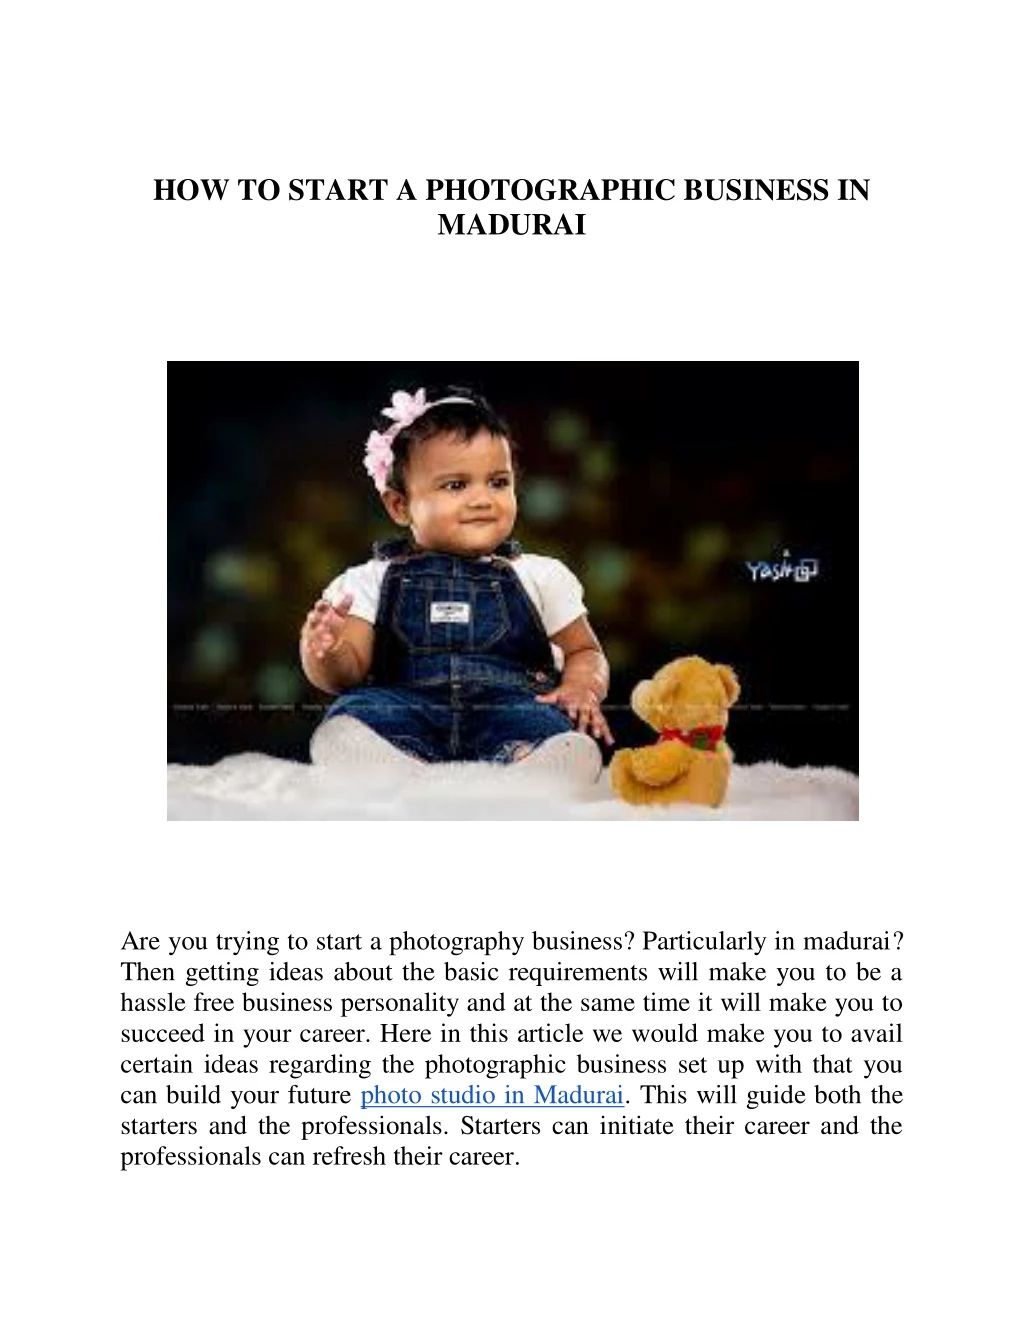 how to start a photographic business in madurai